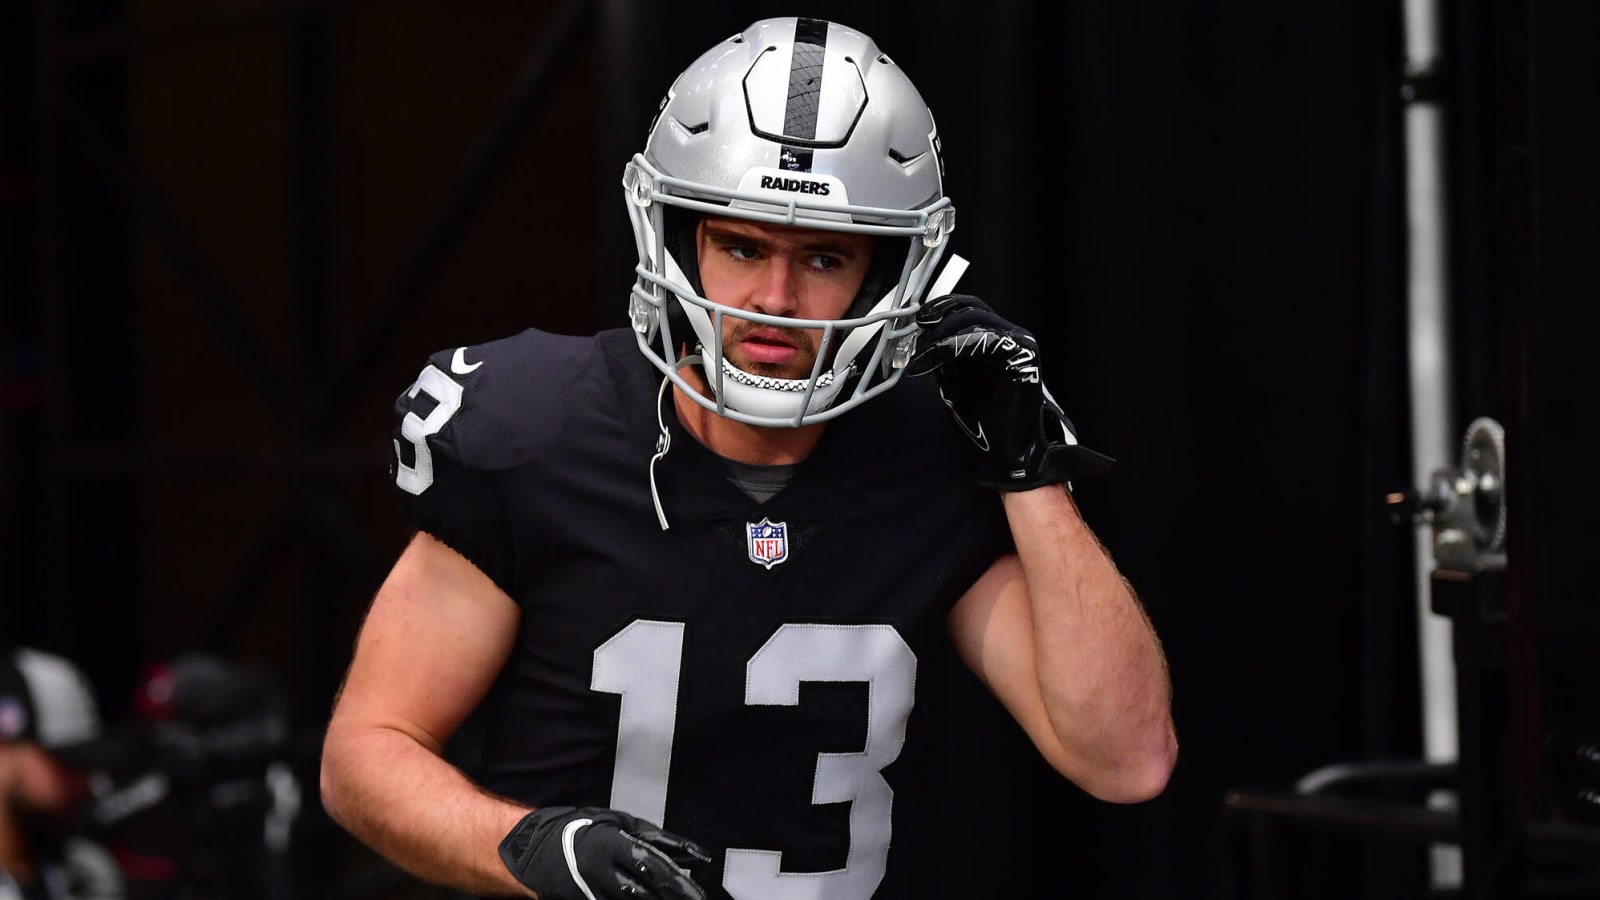 Hunter Renfrow Boosts Raiders QB Aidan O’Connell’s Confidence with Uplifting Message